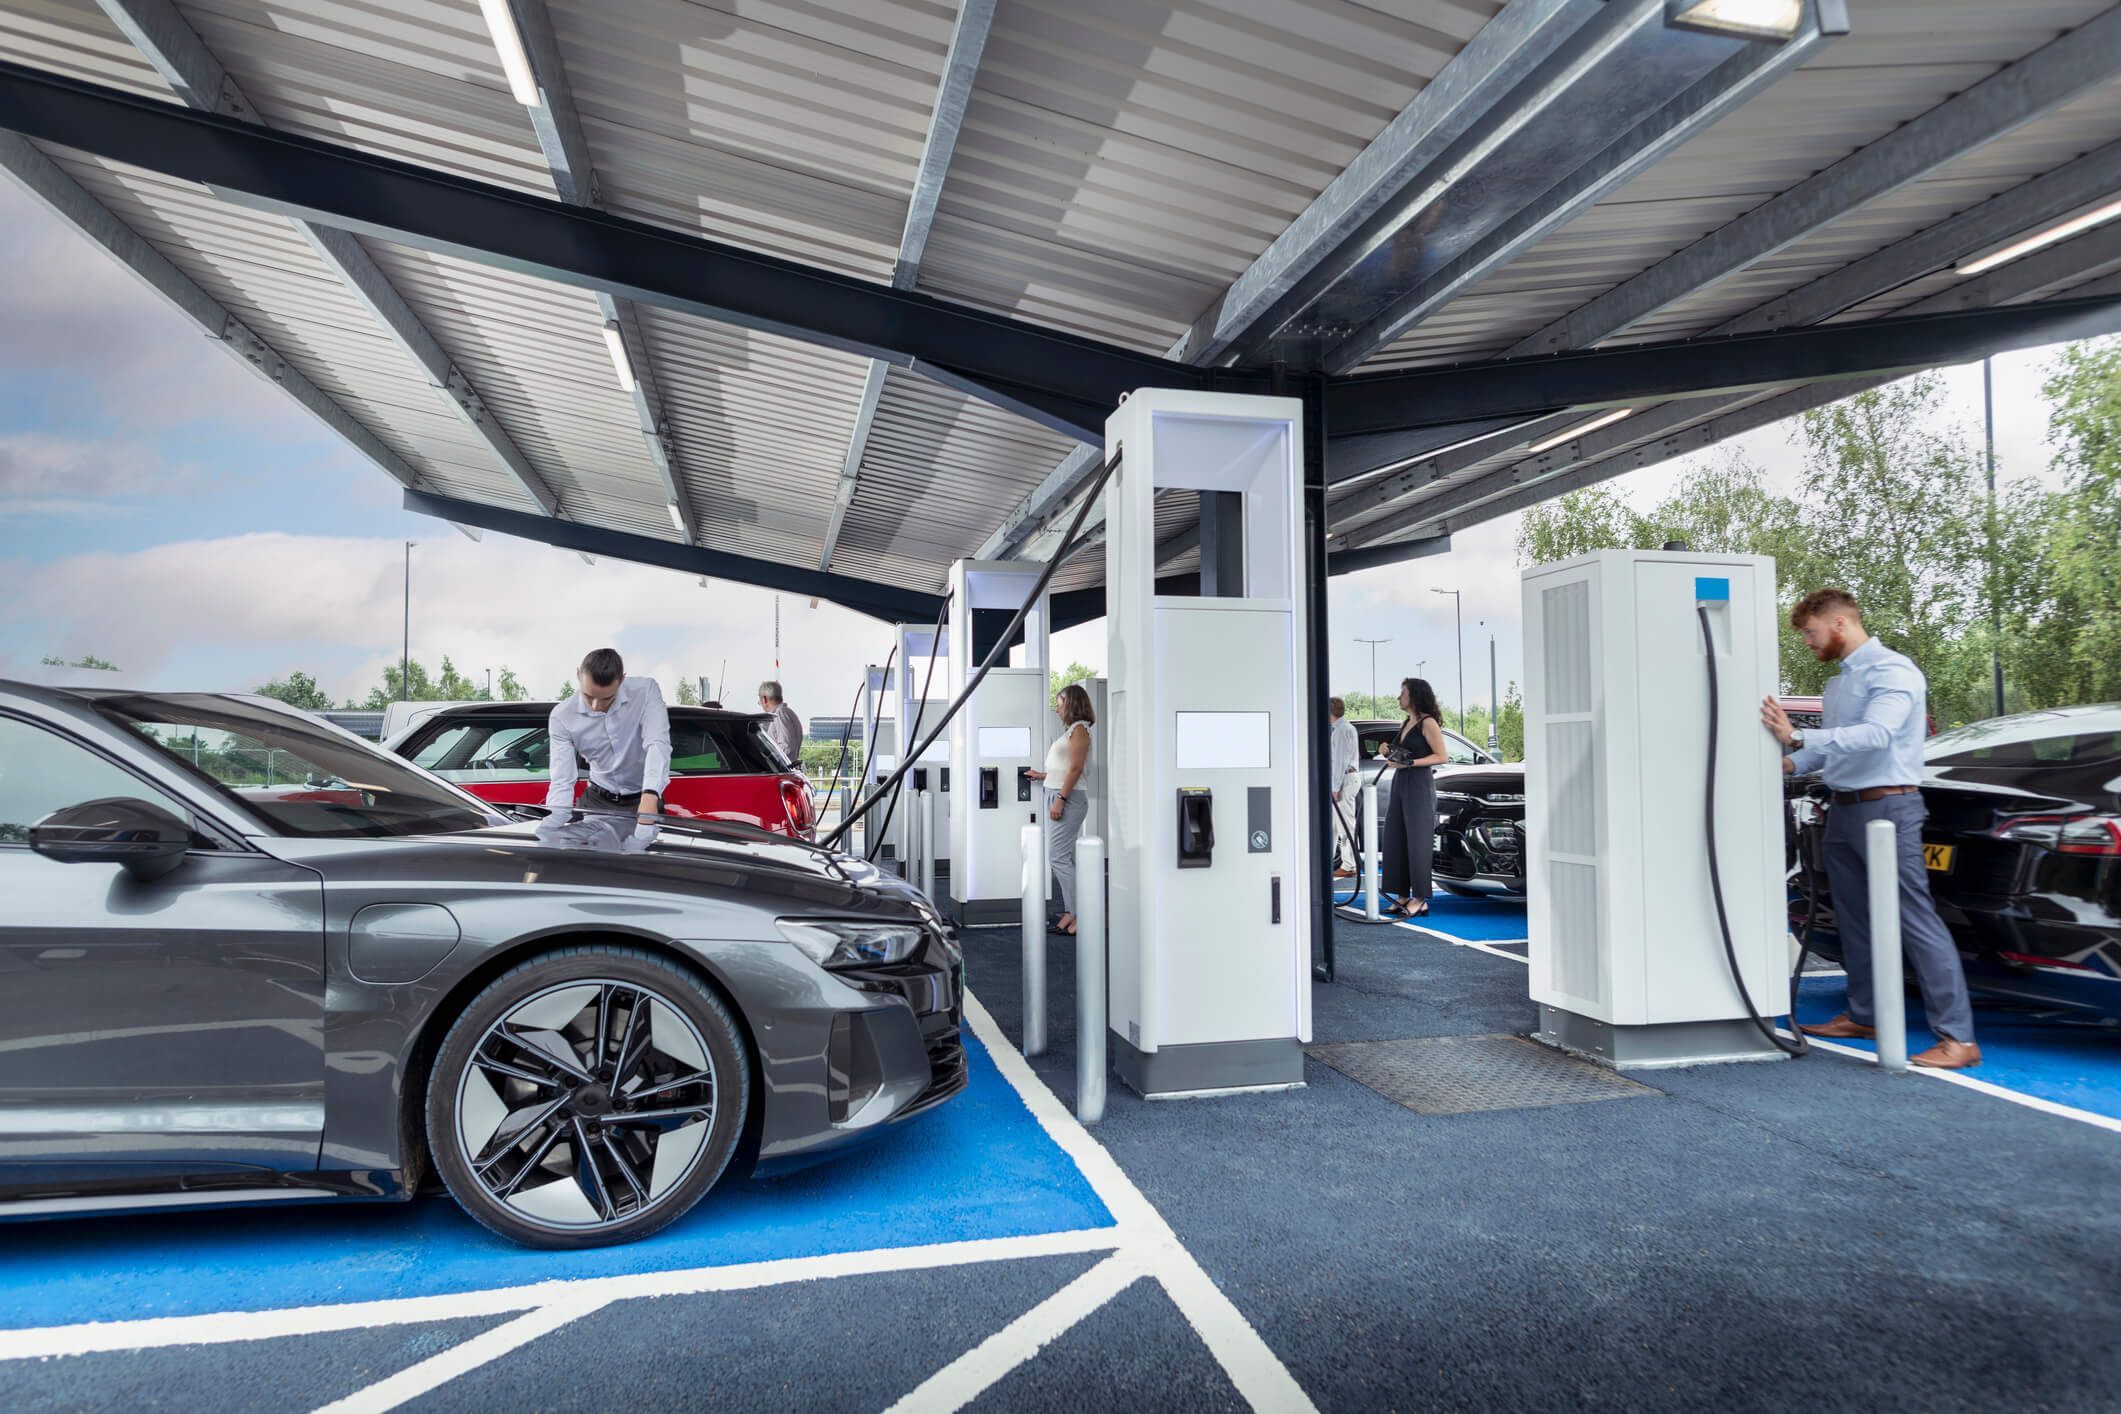 New electric vehicle technology reduces carbon emissions by 11 million tonnes worldwide